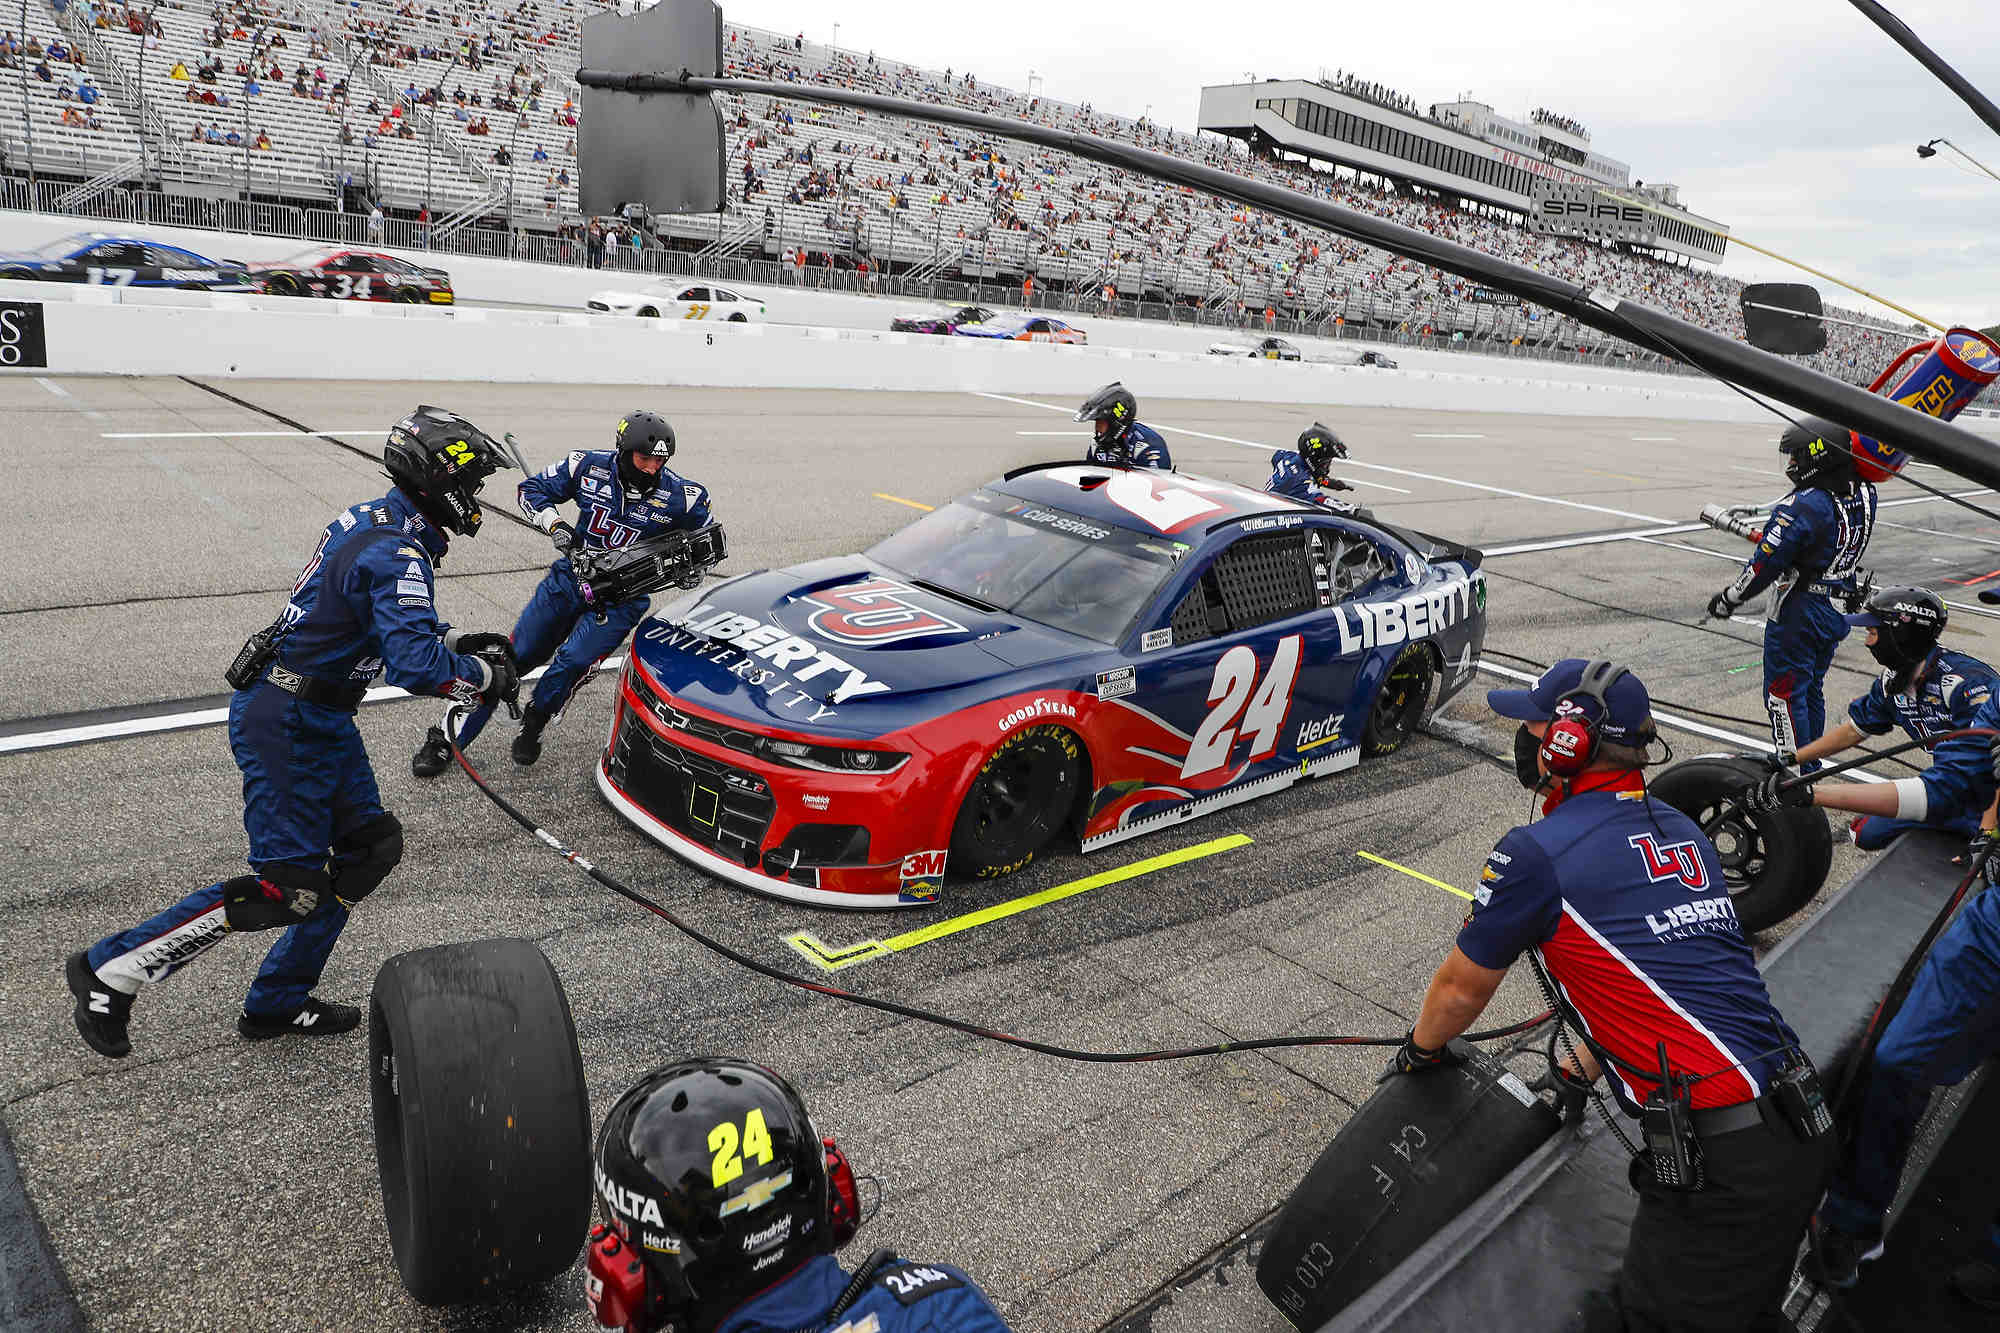 William Byron's crew chief fined - loose or missing lug nuts